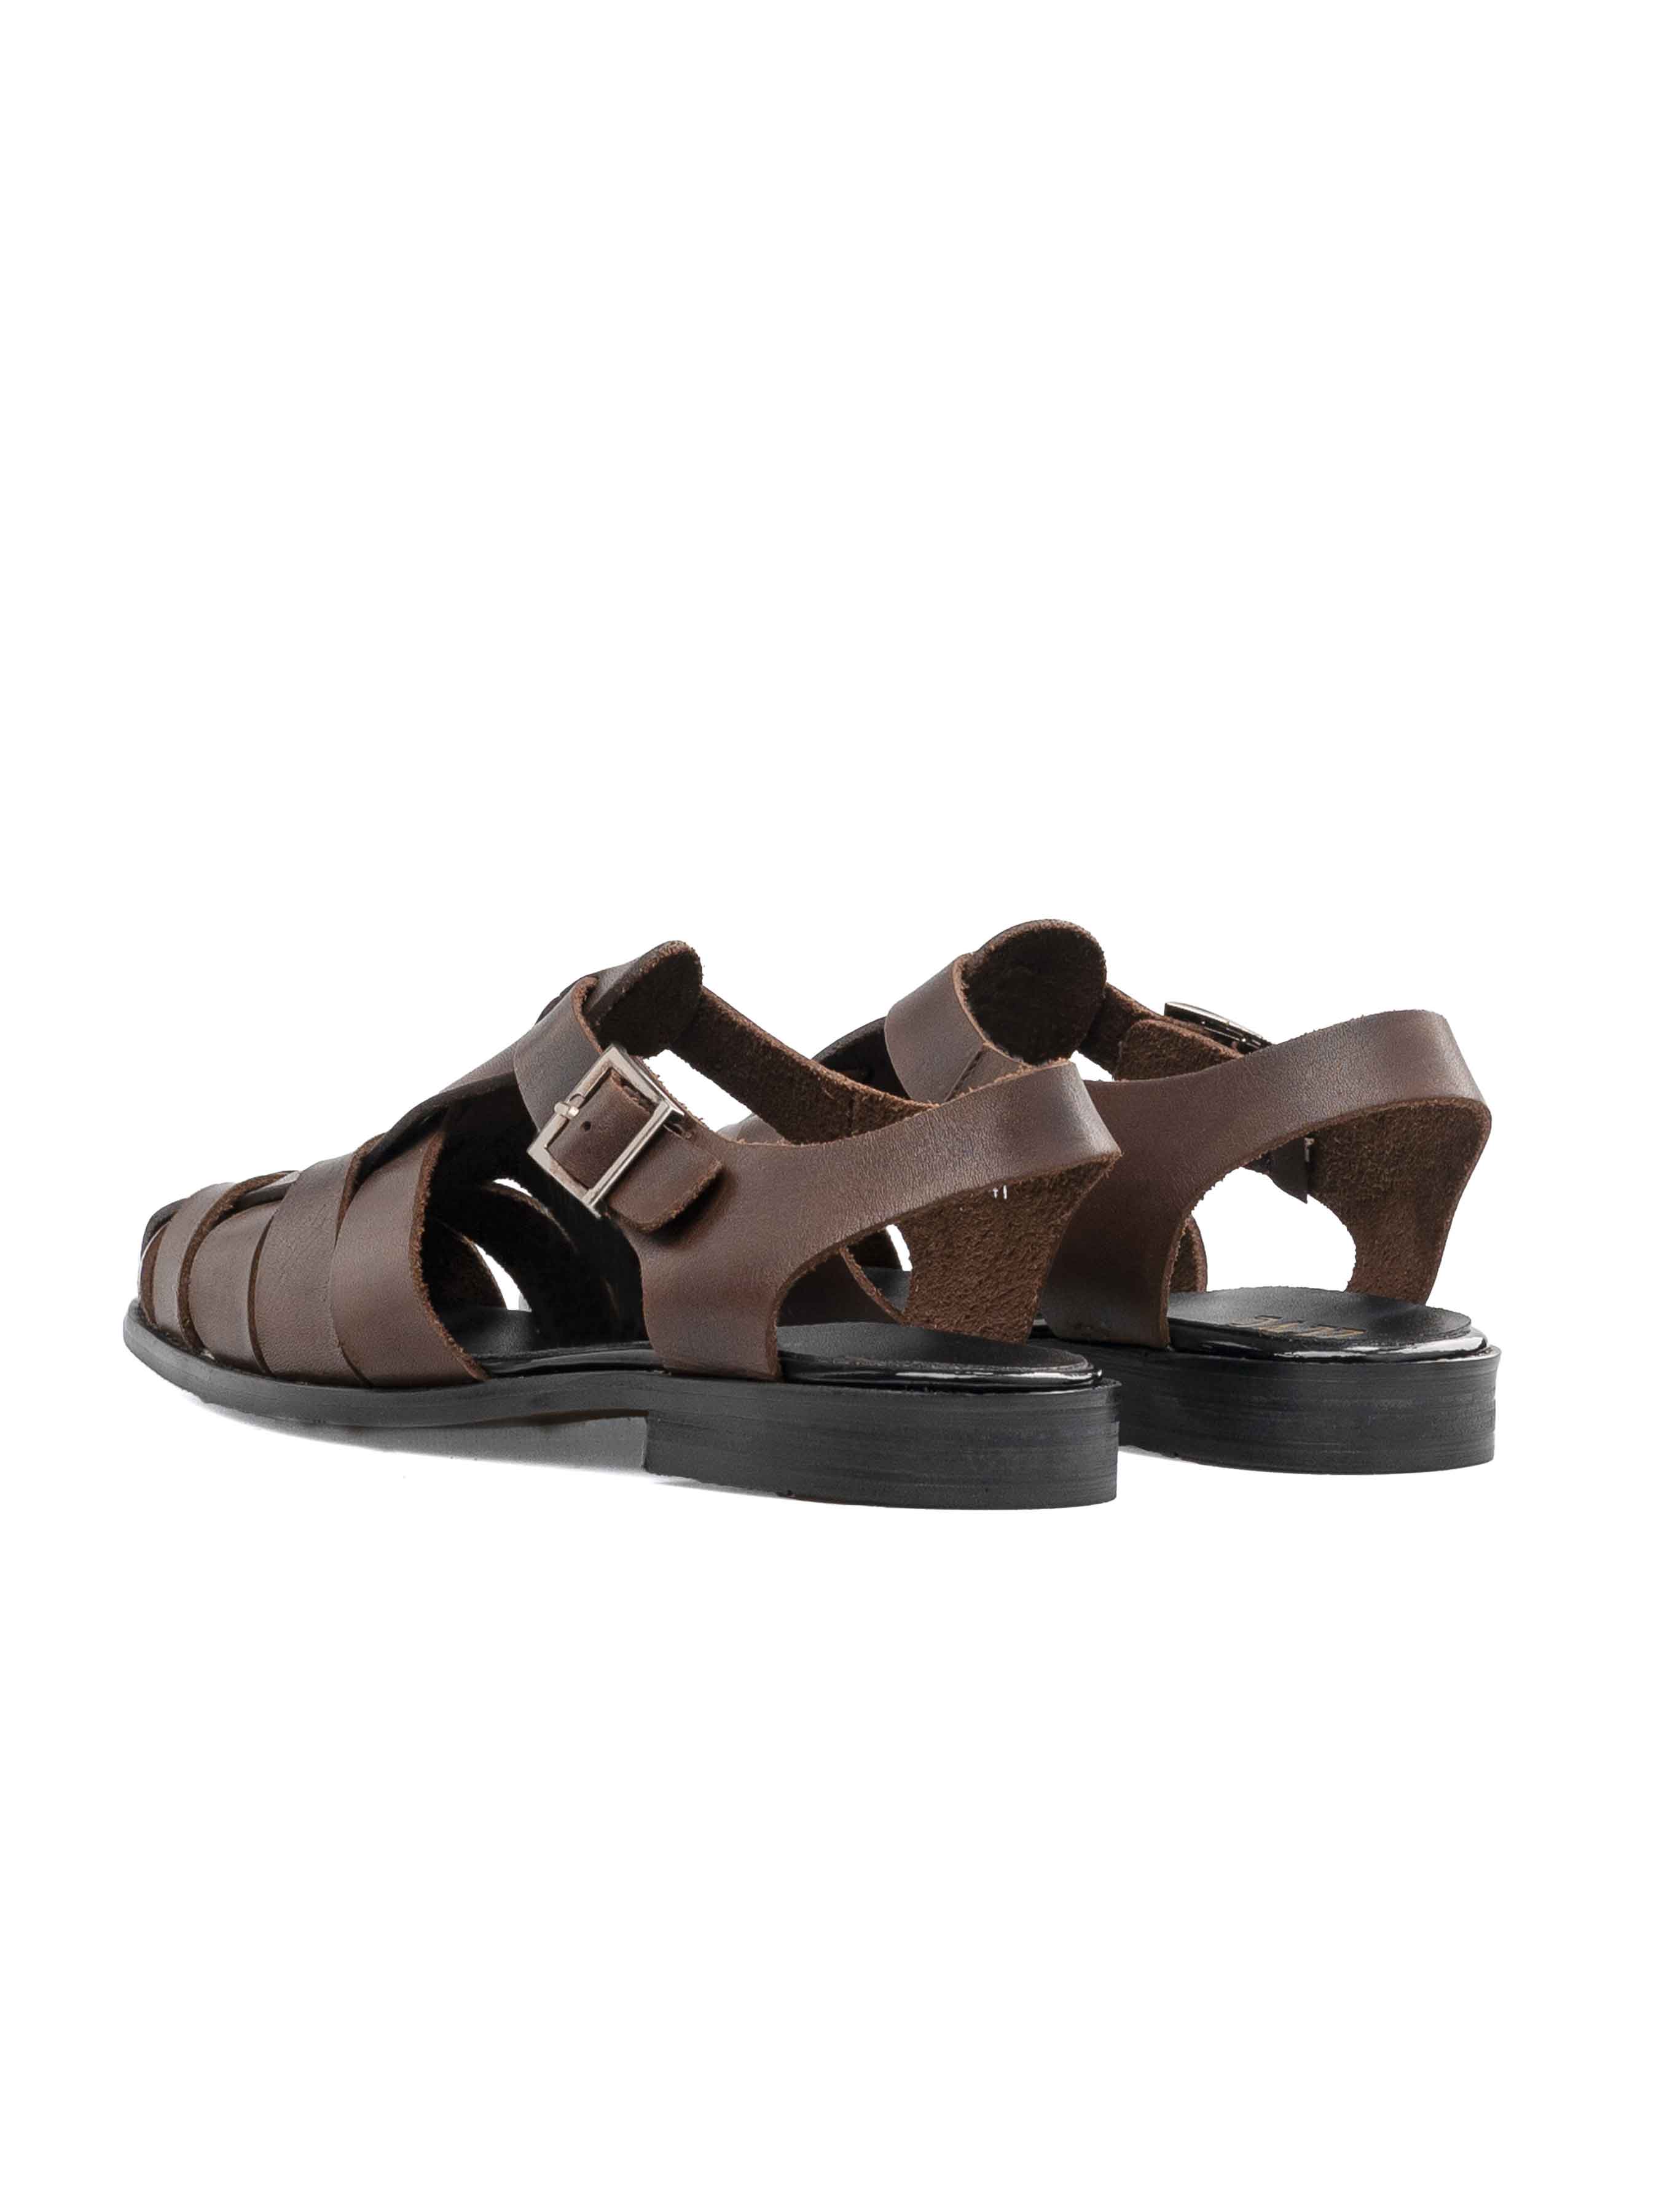 Colin Cage Sandal - Dark Brown (Hand Painted Patina)